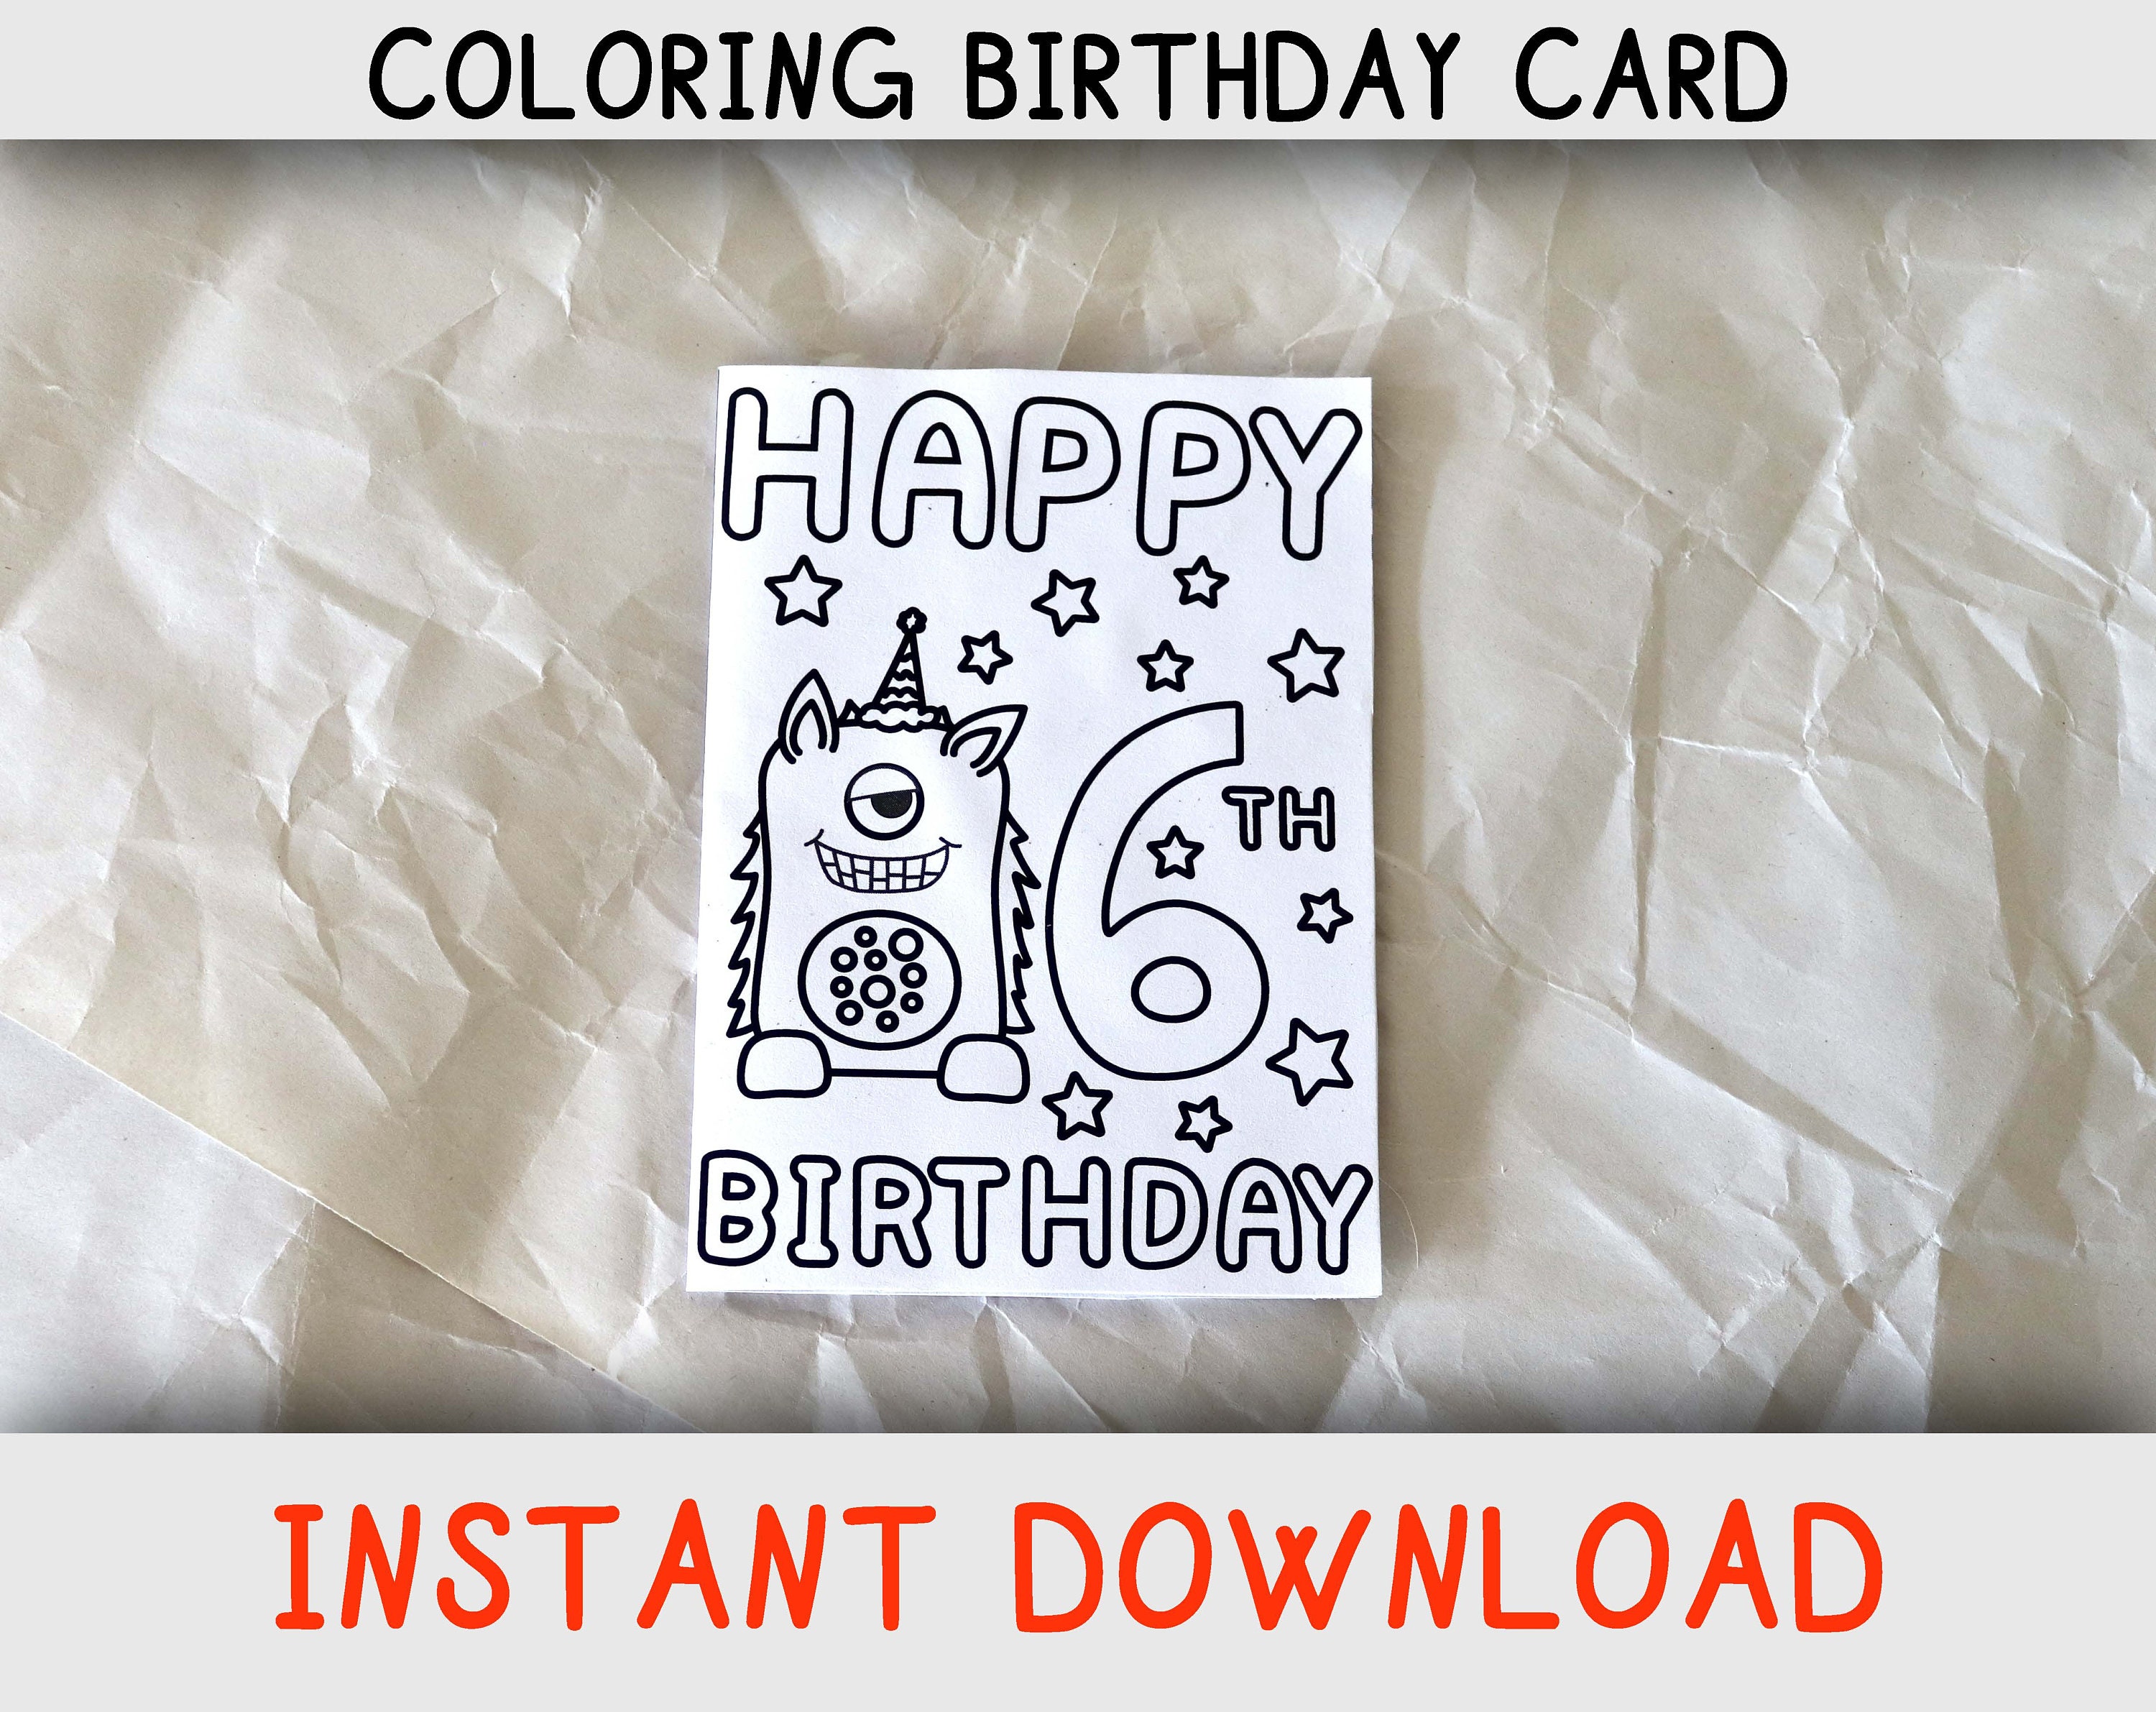 Happy birthday coloring card for six year old who loves coloring pages and monsters printable birthday card for sixth birthday download